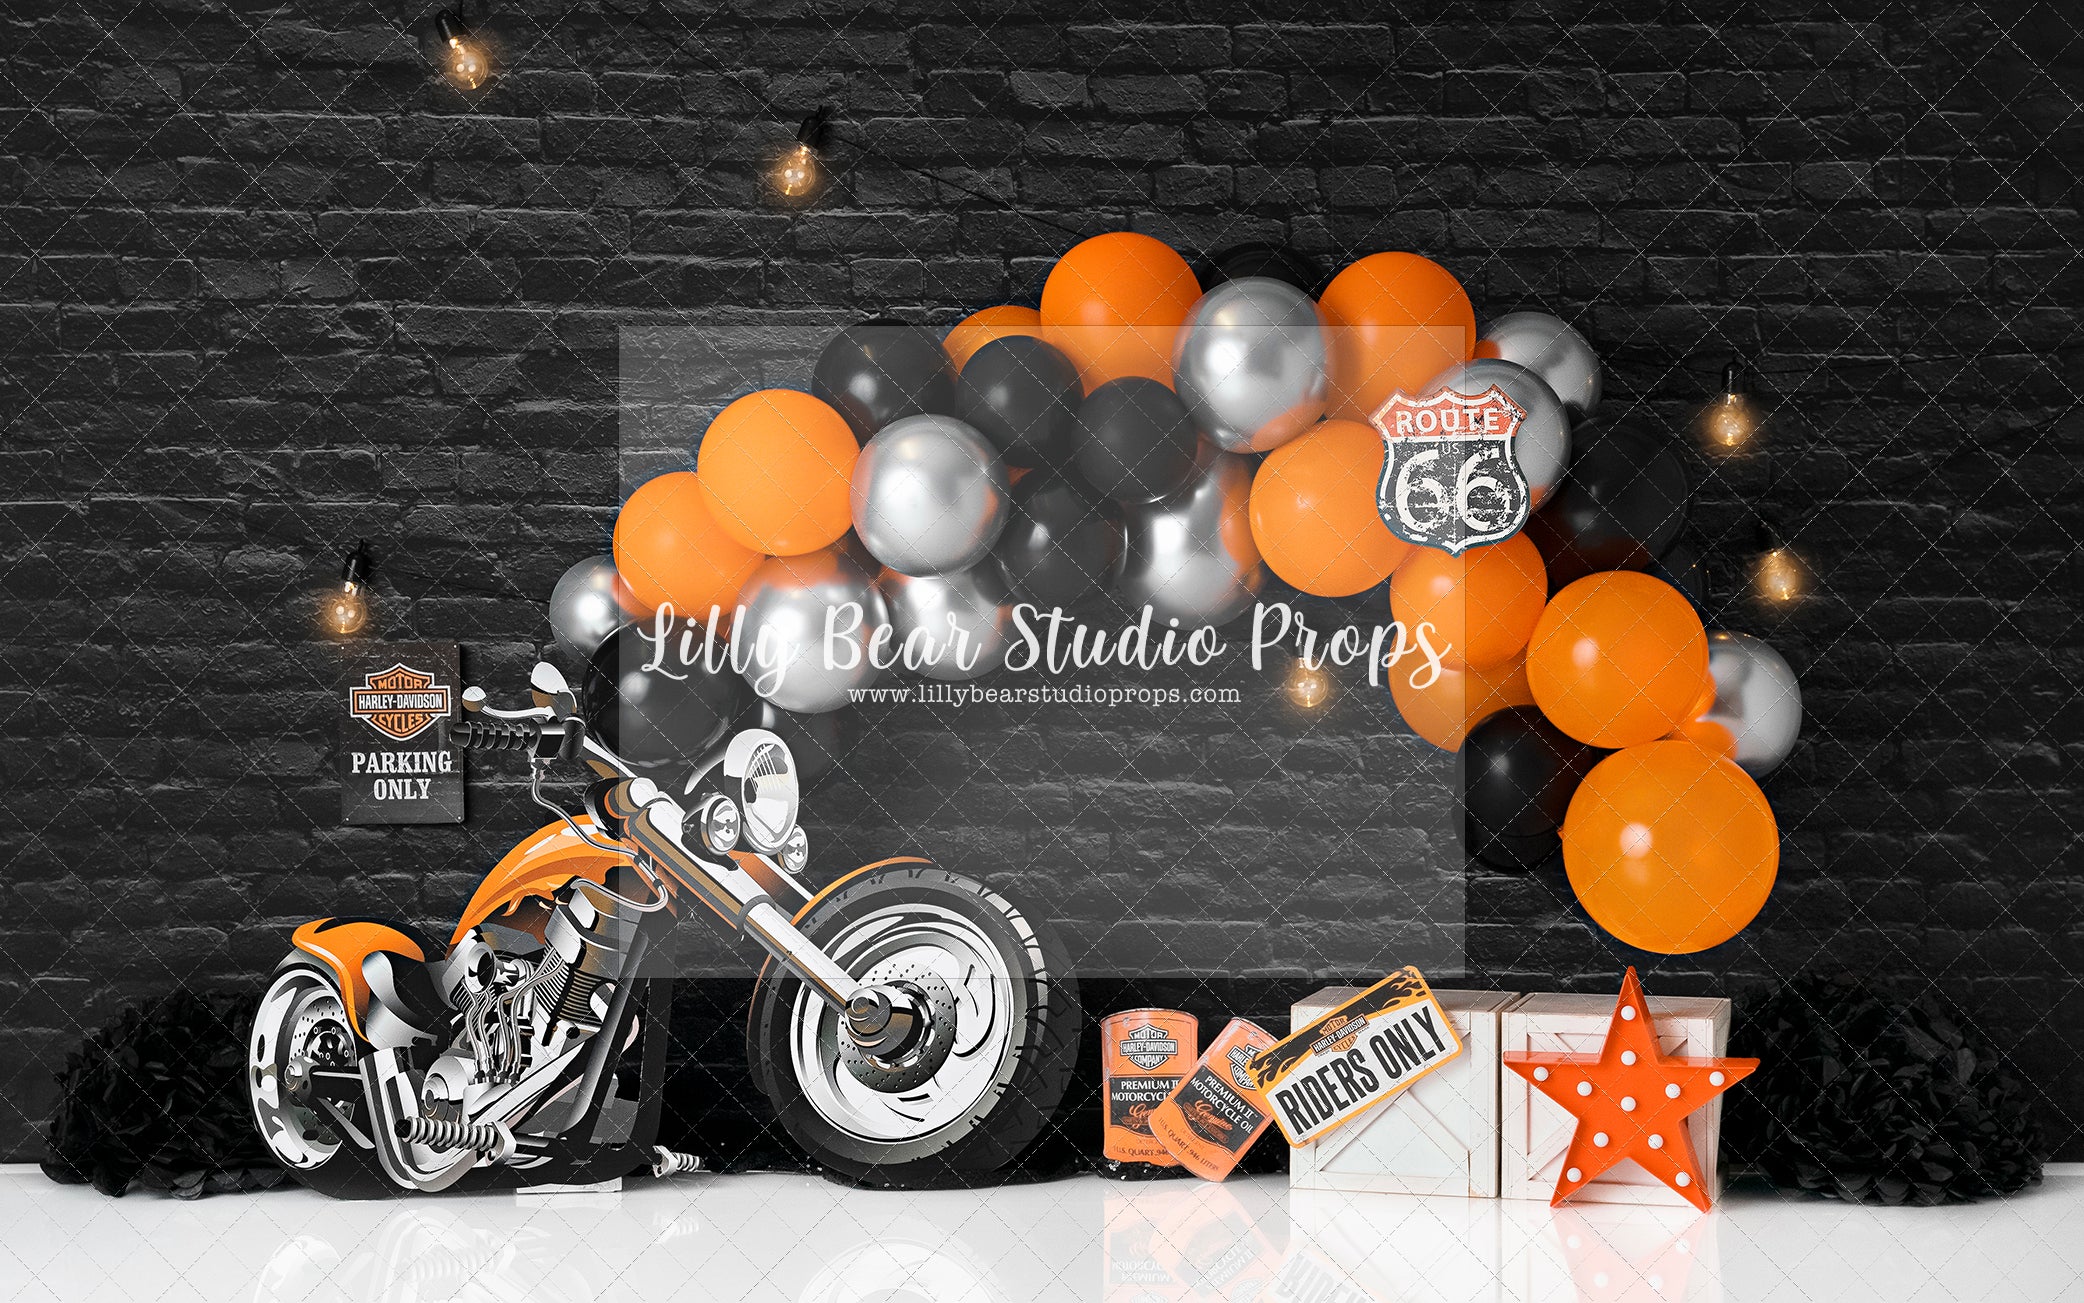 Bol Productions 6503LRSKY Motorcycle, Harley Davidson Picture Frame, Lets  Ride Sky by Personally Yours : : Car & Motorbike